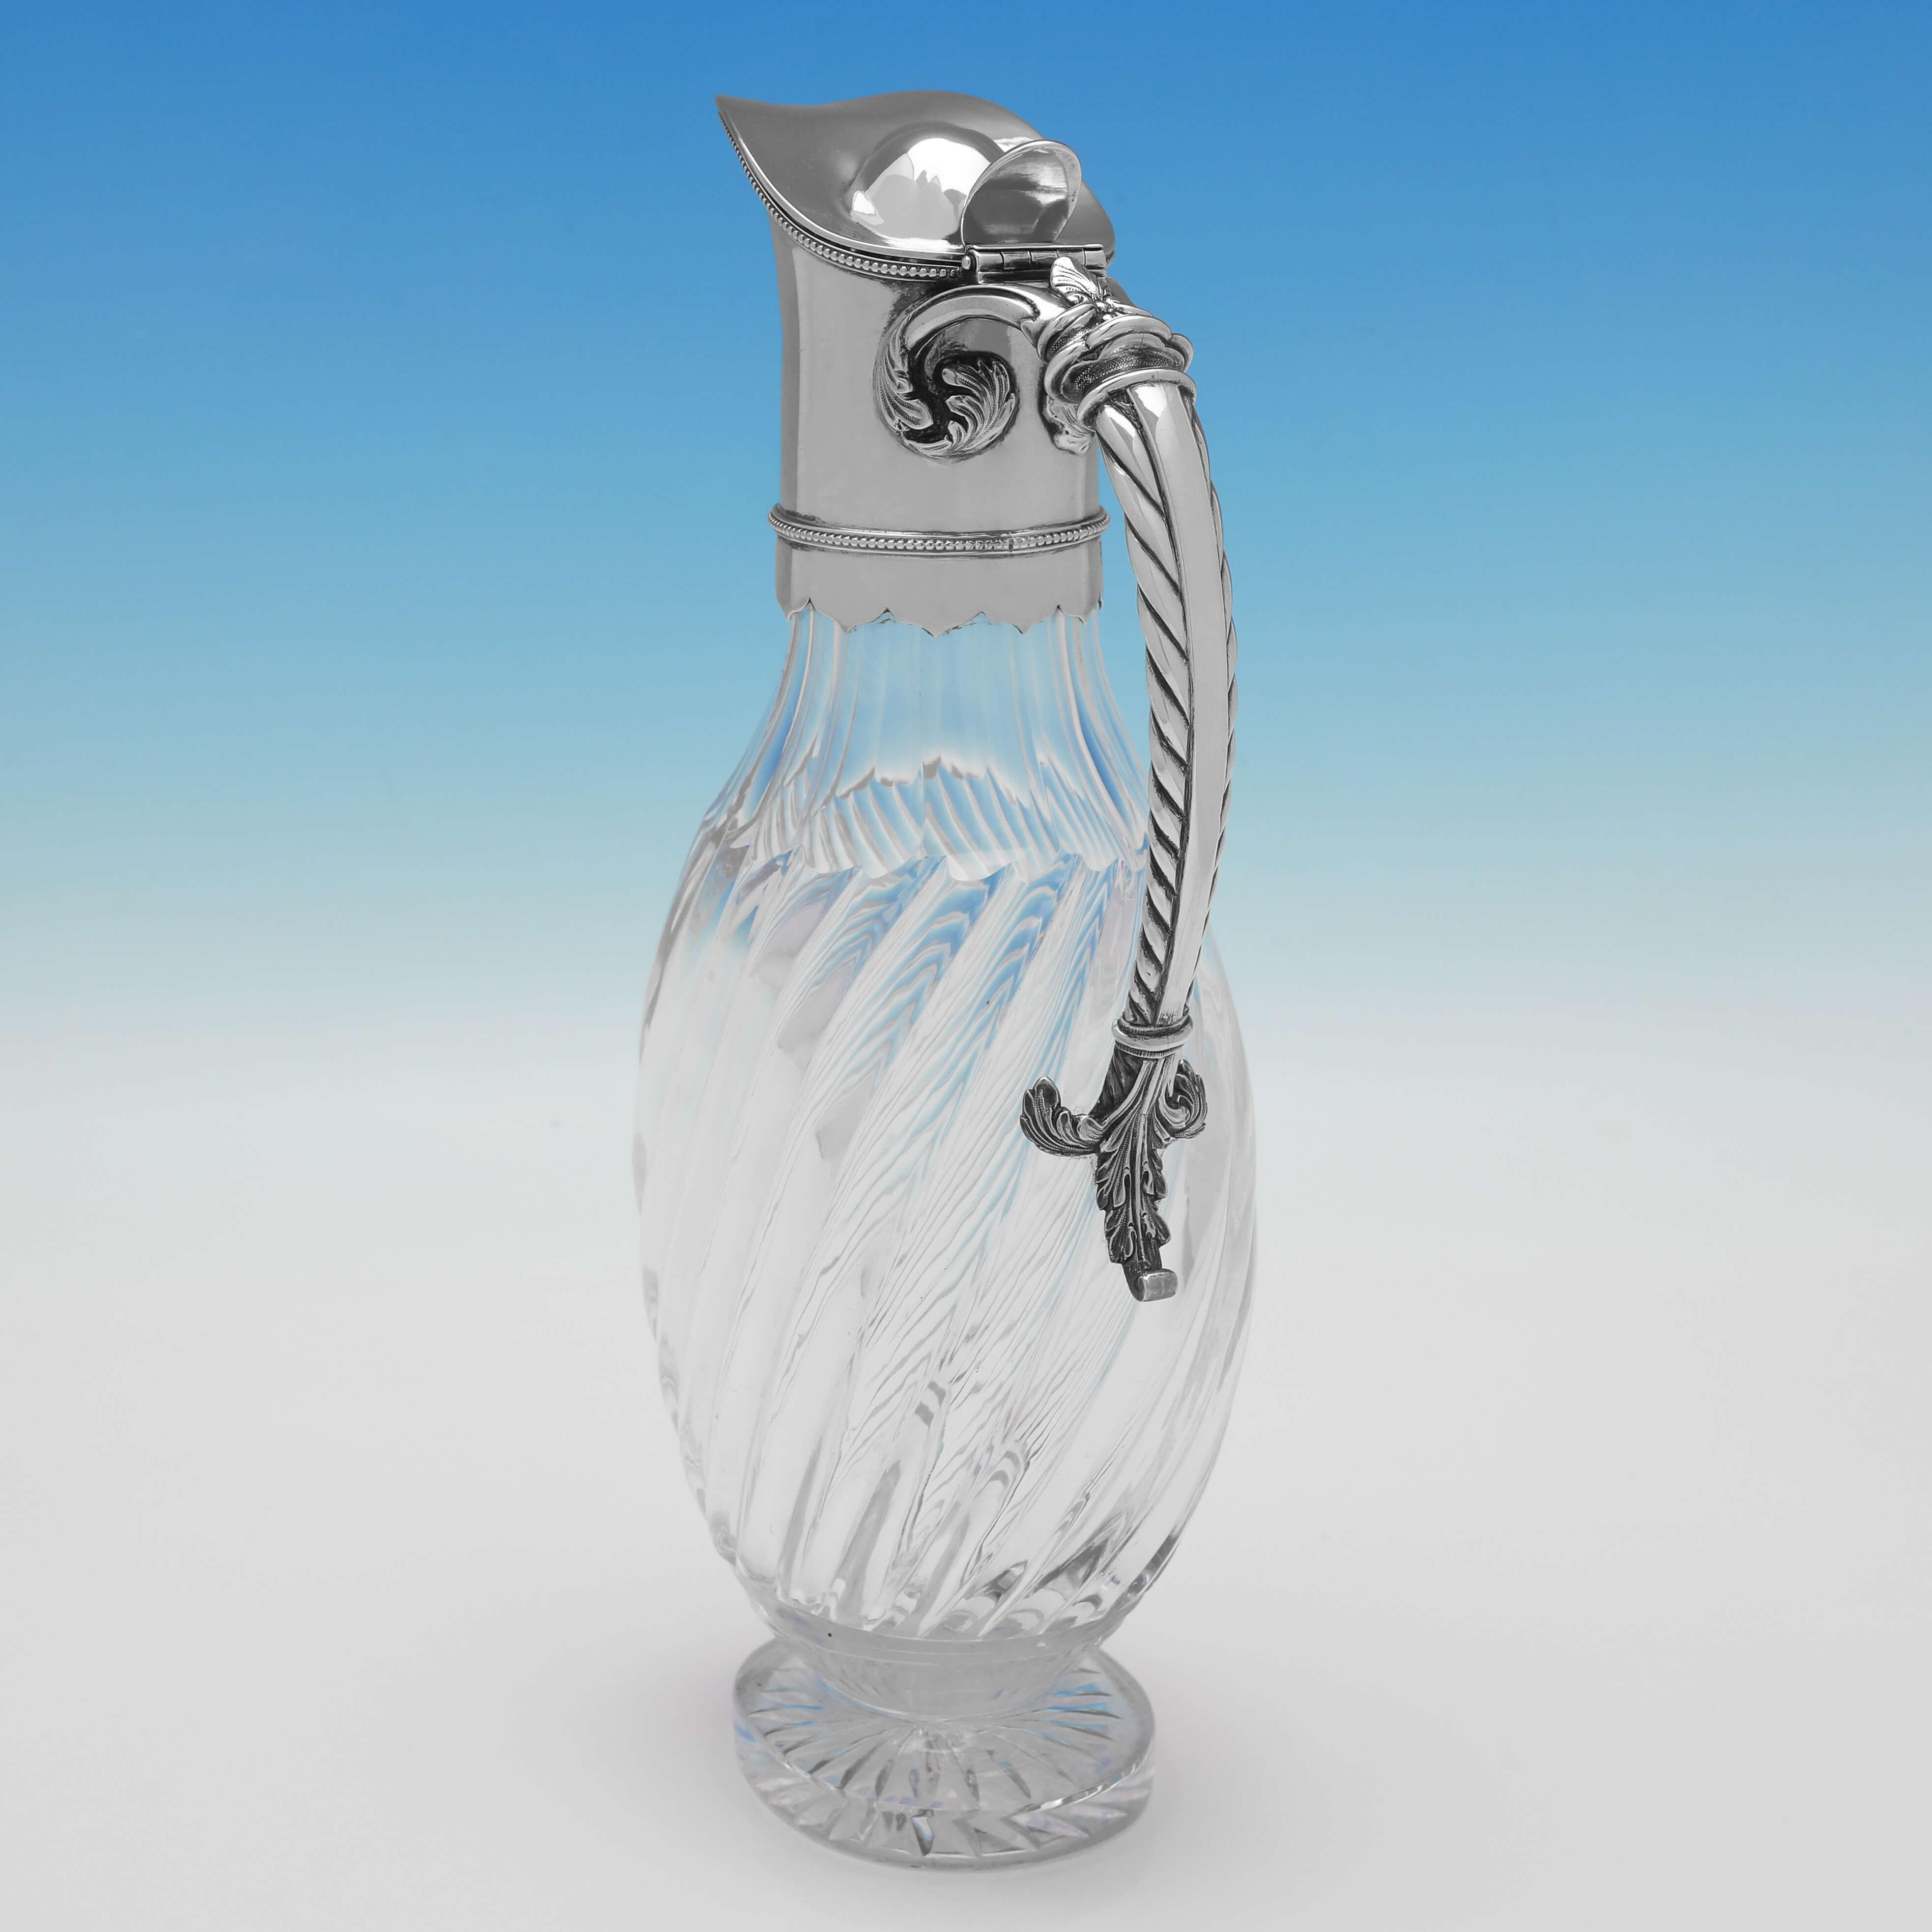 Hallmarked in London in 1886 by Edgar Finley & Hugh Taylor, this attractive, Victorian, Antique Sterling Silver Claret Jug, features a glass body with swirled fluting, a plain silver mount and a twisted silver handle. 

The claret jug measures